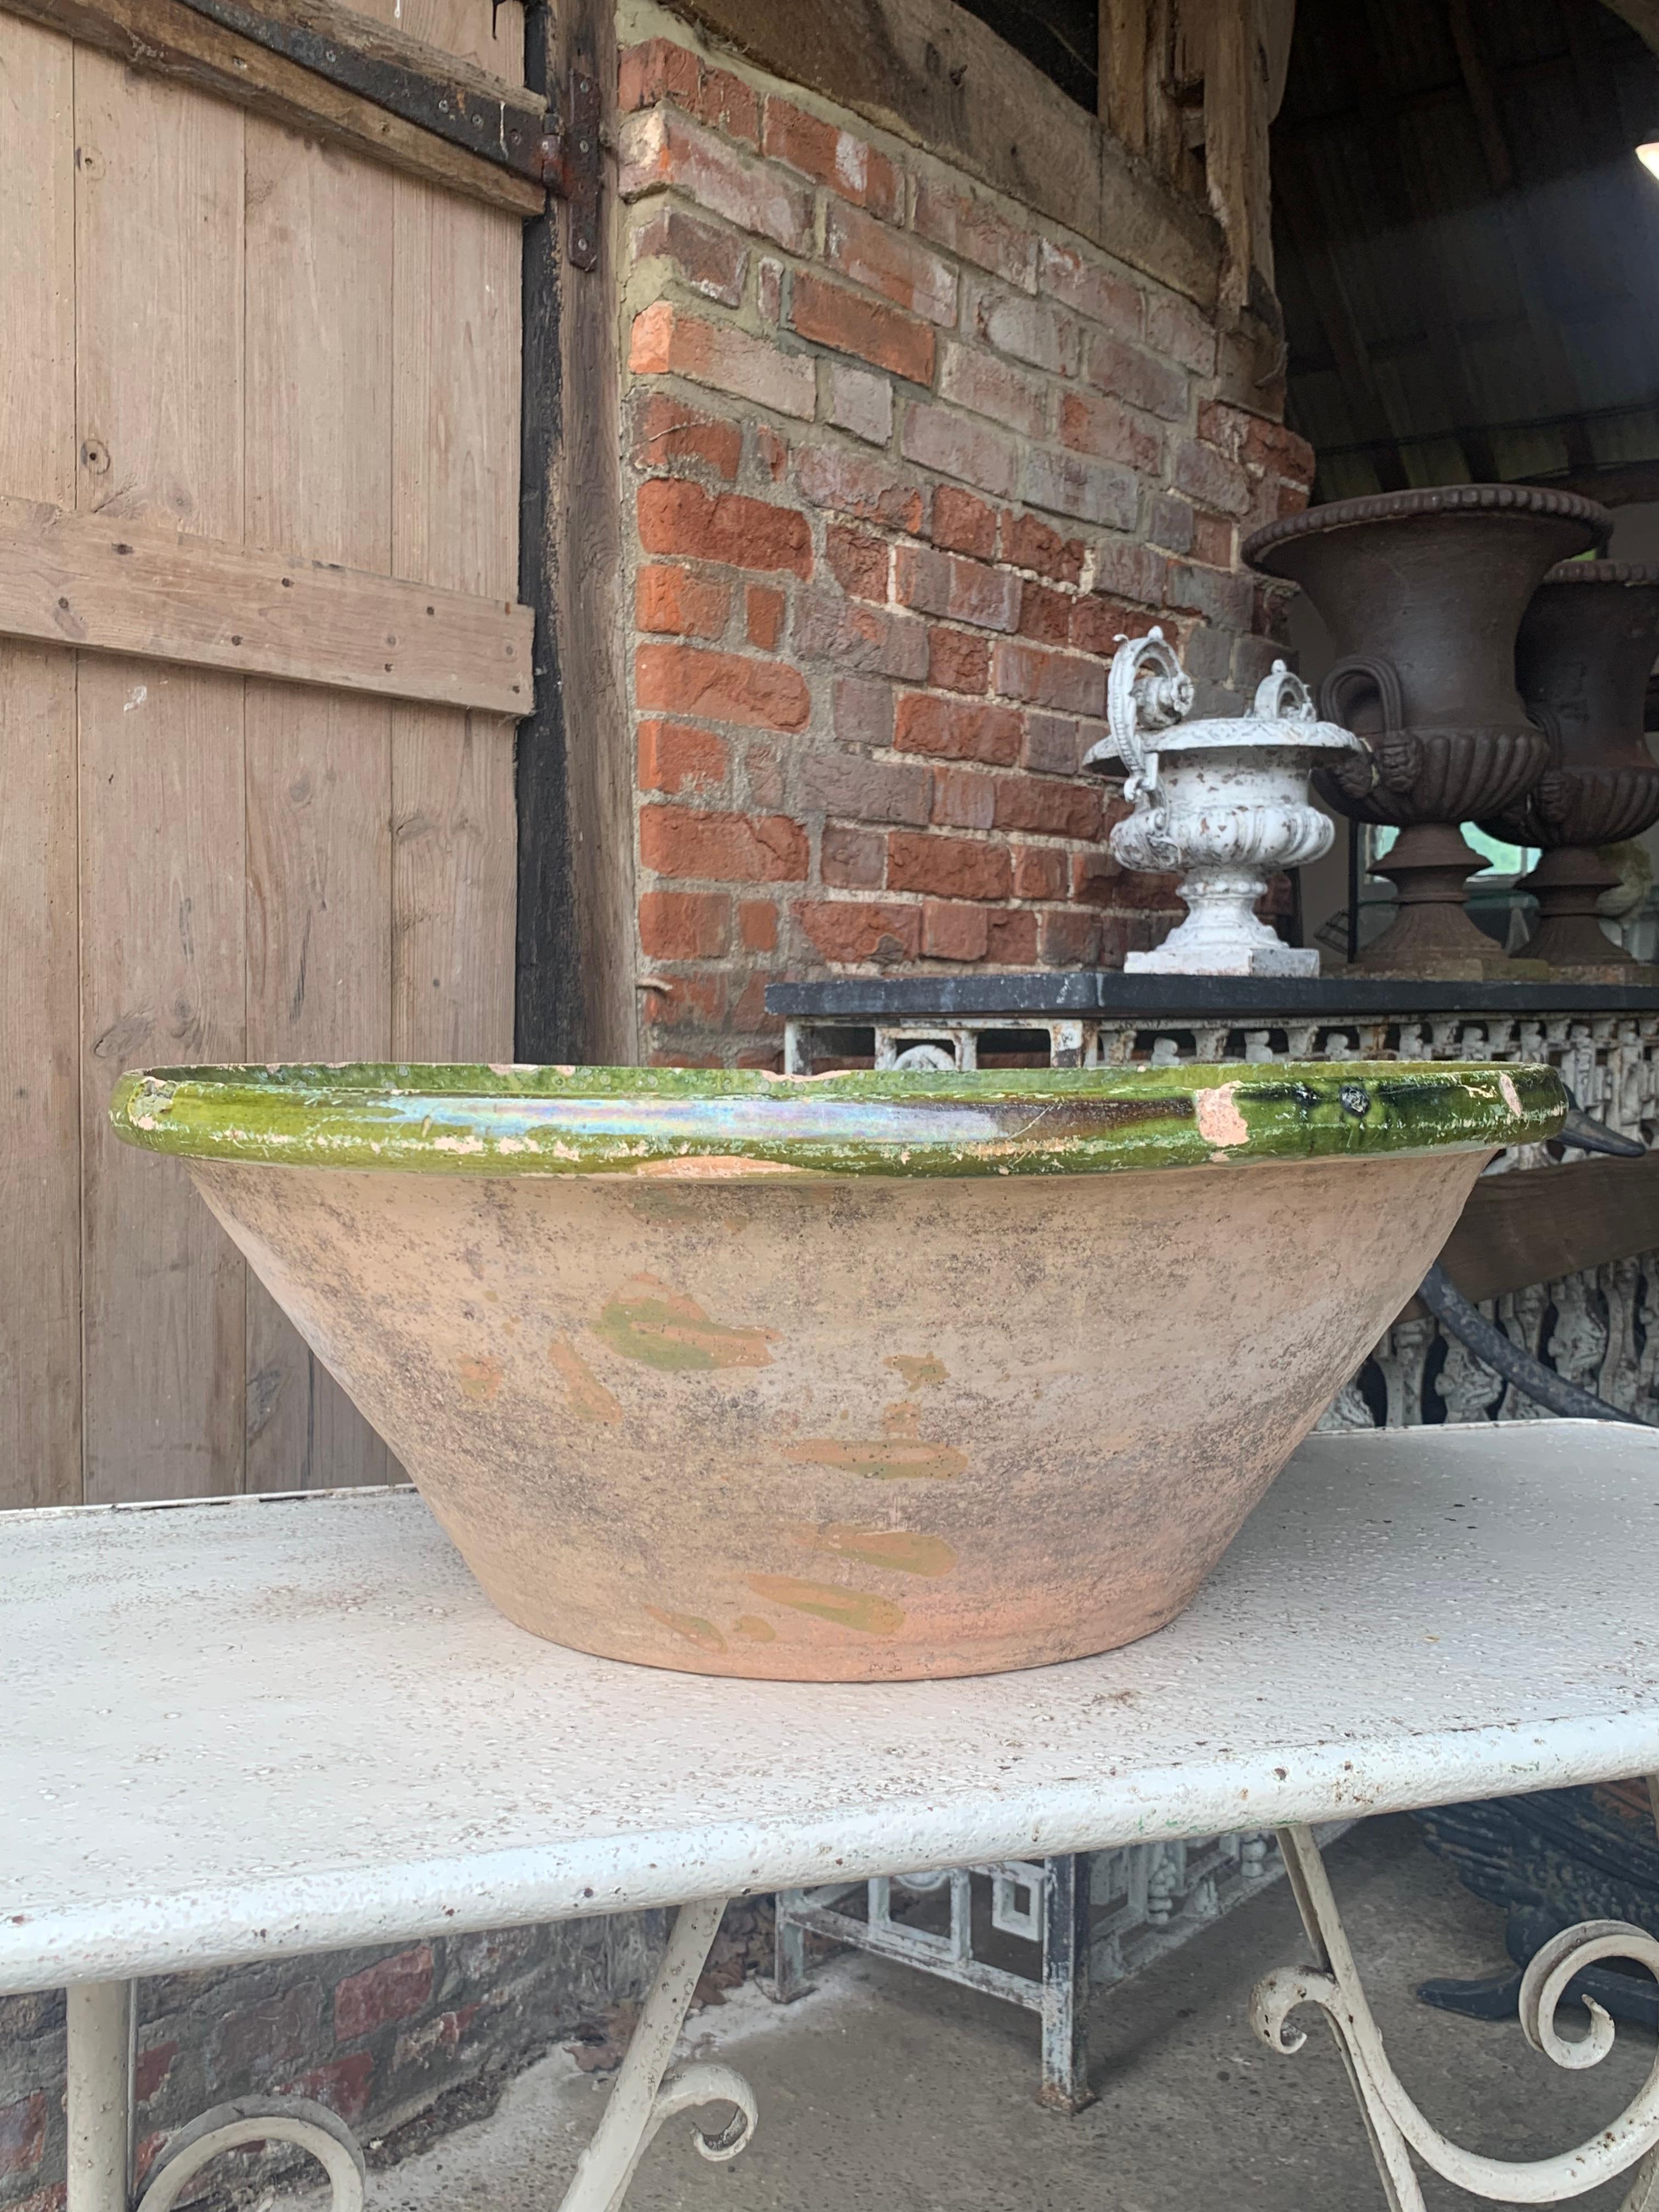 A large 19th century French earthenware Tian bowl with a wonderful green glaze. These were used as mixing bowls in the south of France near the Spanish border. They now make wonderful decorative pieces.

You can see the makers handprint on one side